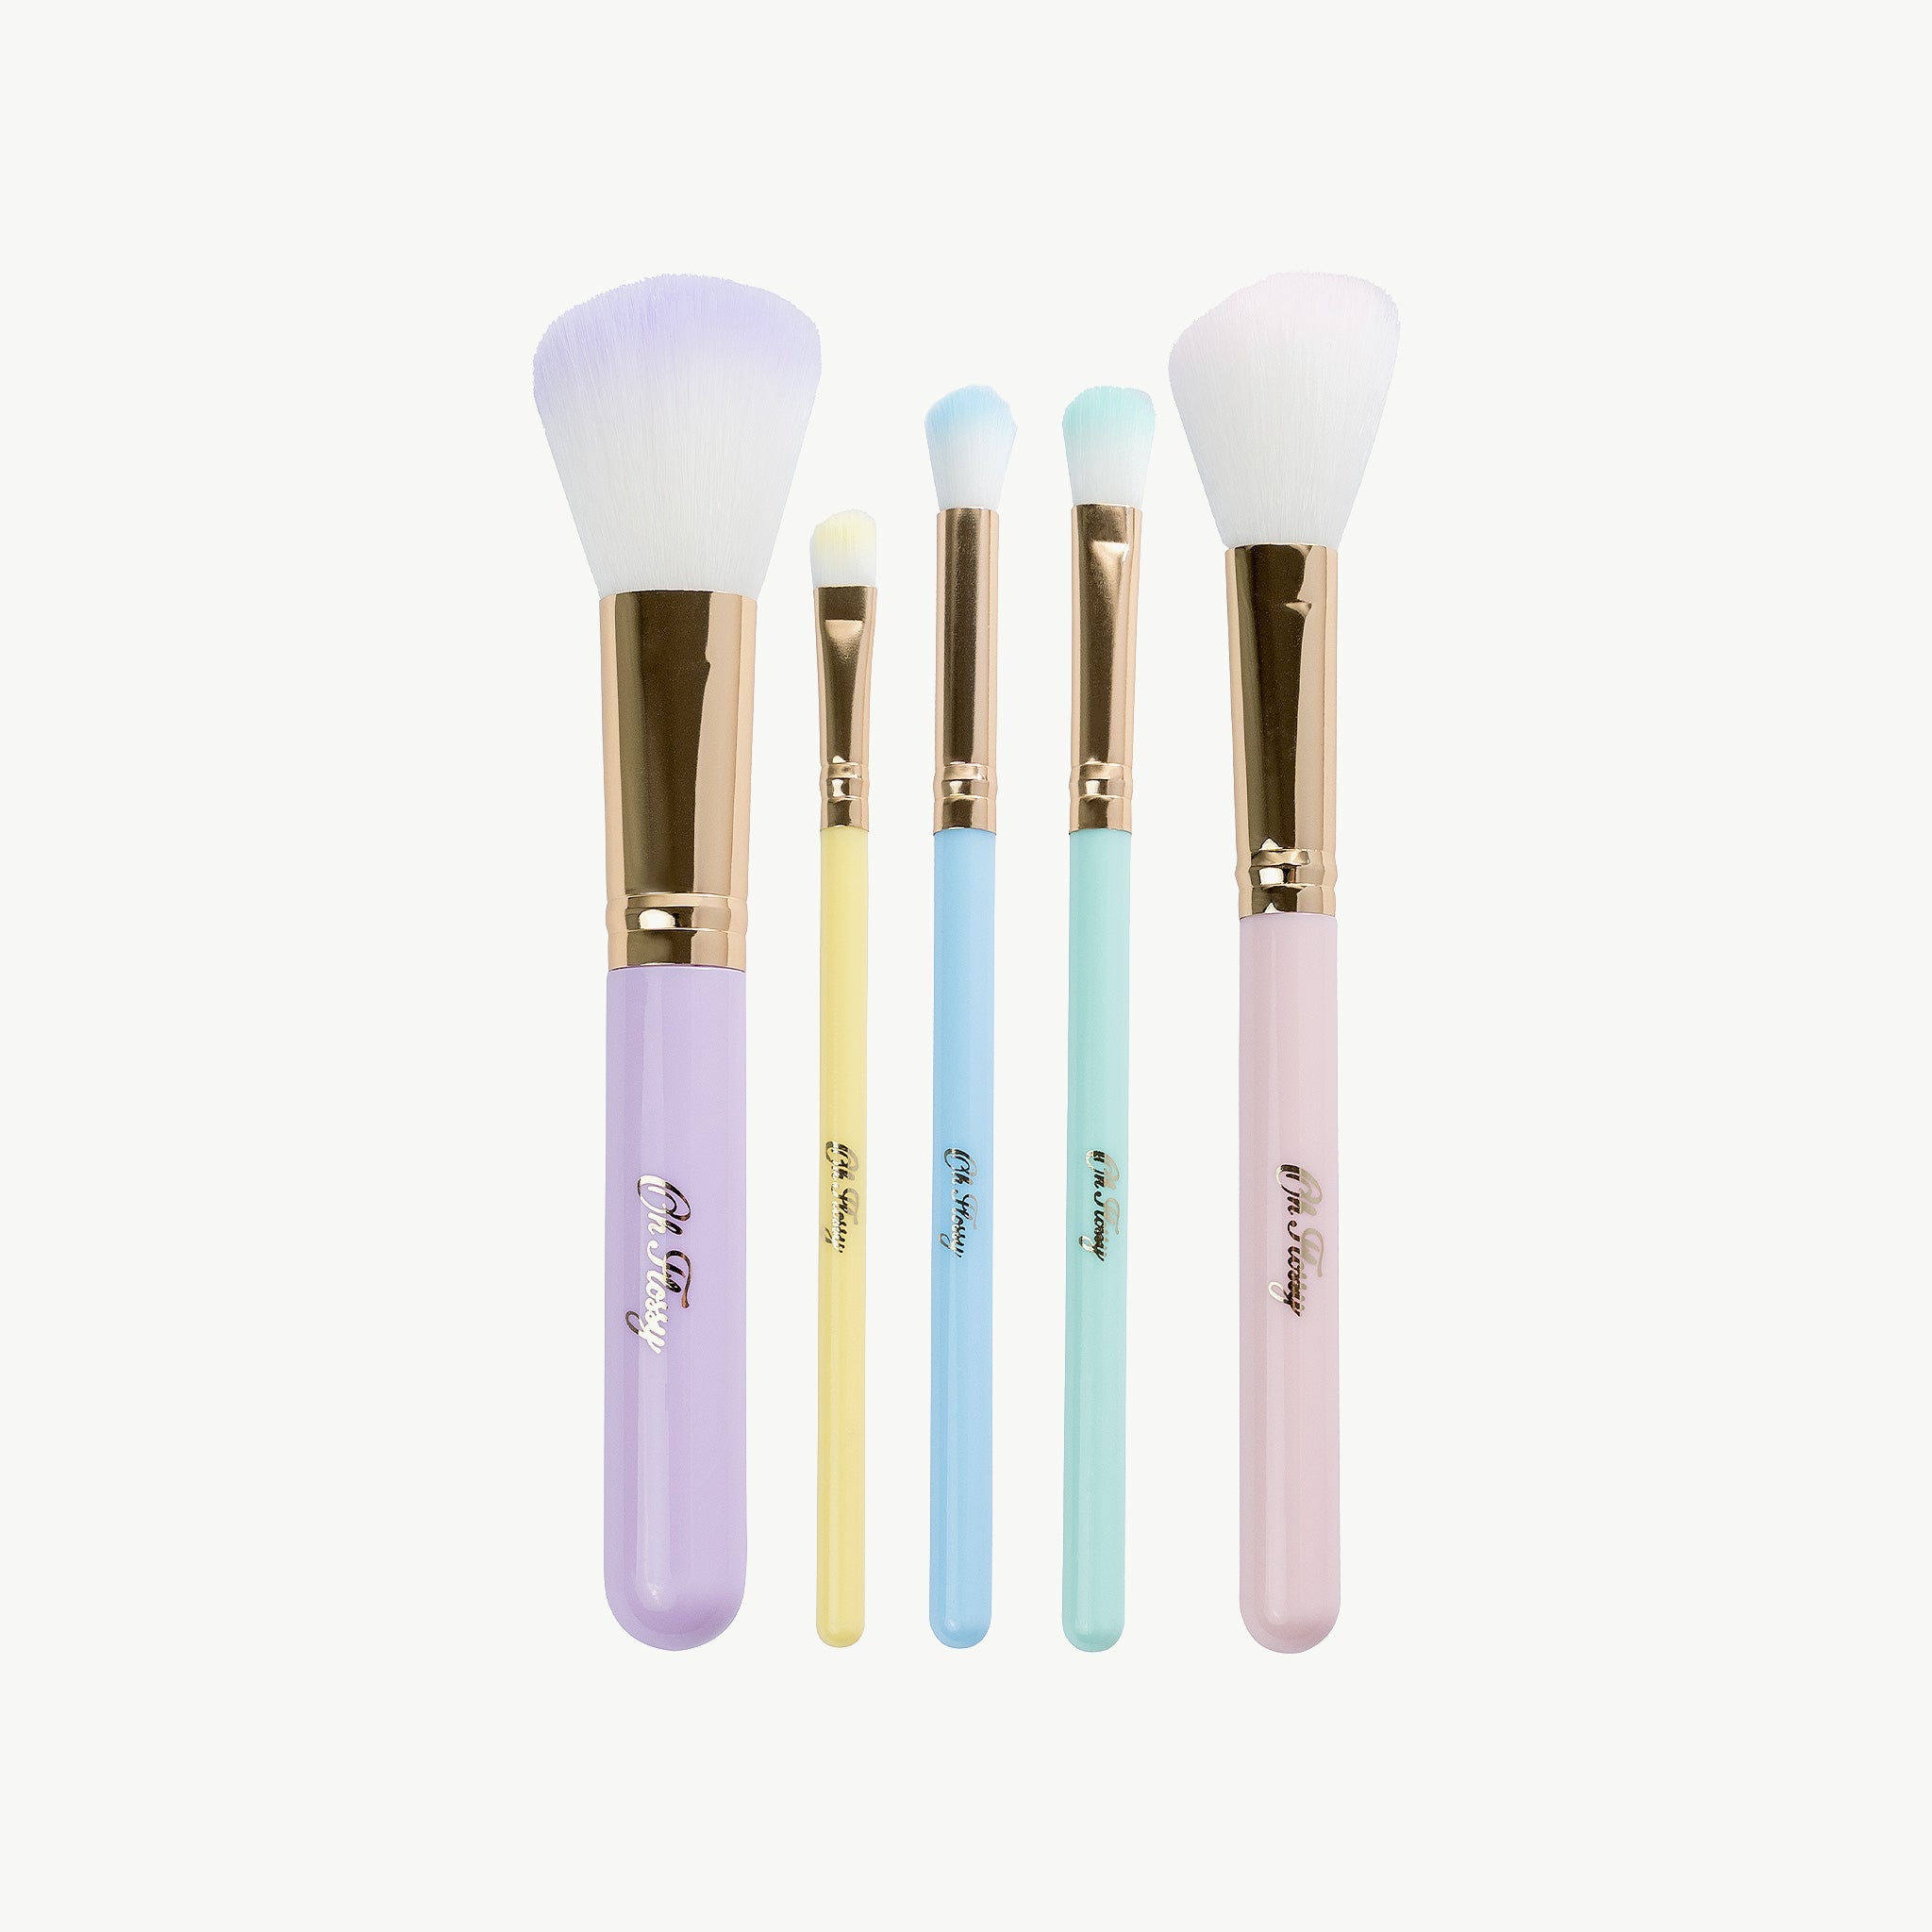 Oh Flossy 5-Piece Rainbow Makeup Brush Set - Toybox Tales